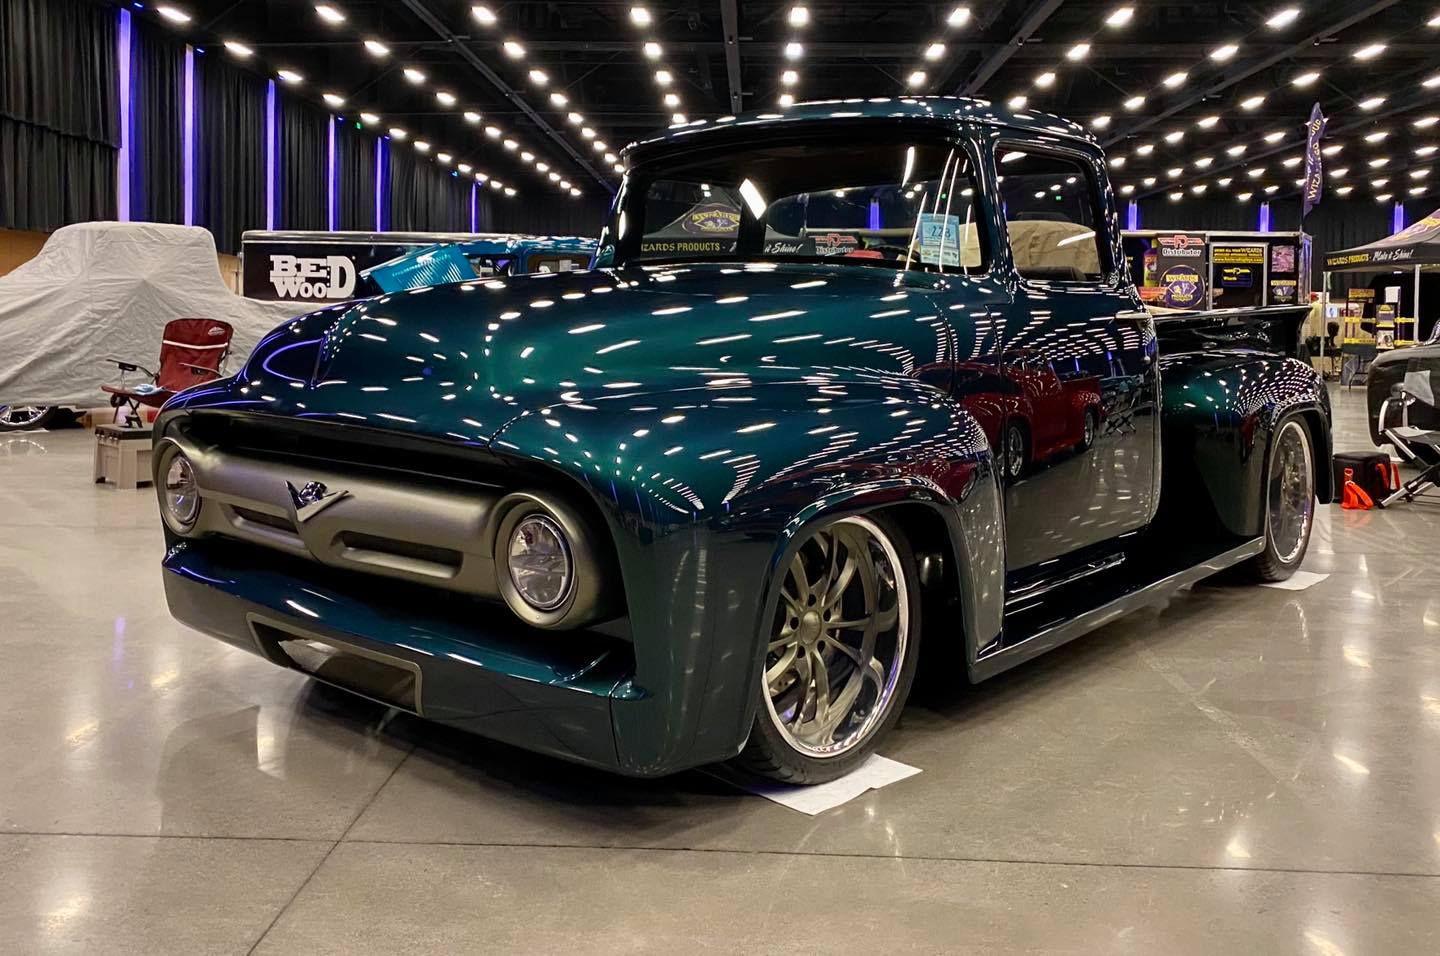 1956 Ford F100 Coyote Swapped Wins Truck of the Year 4.jpg